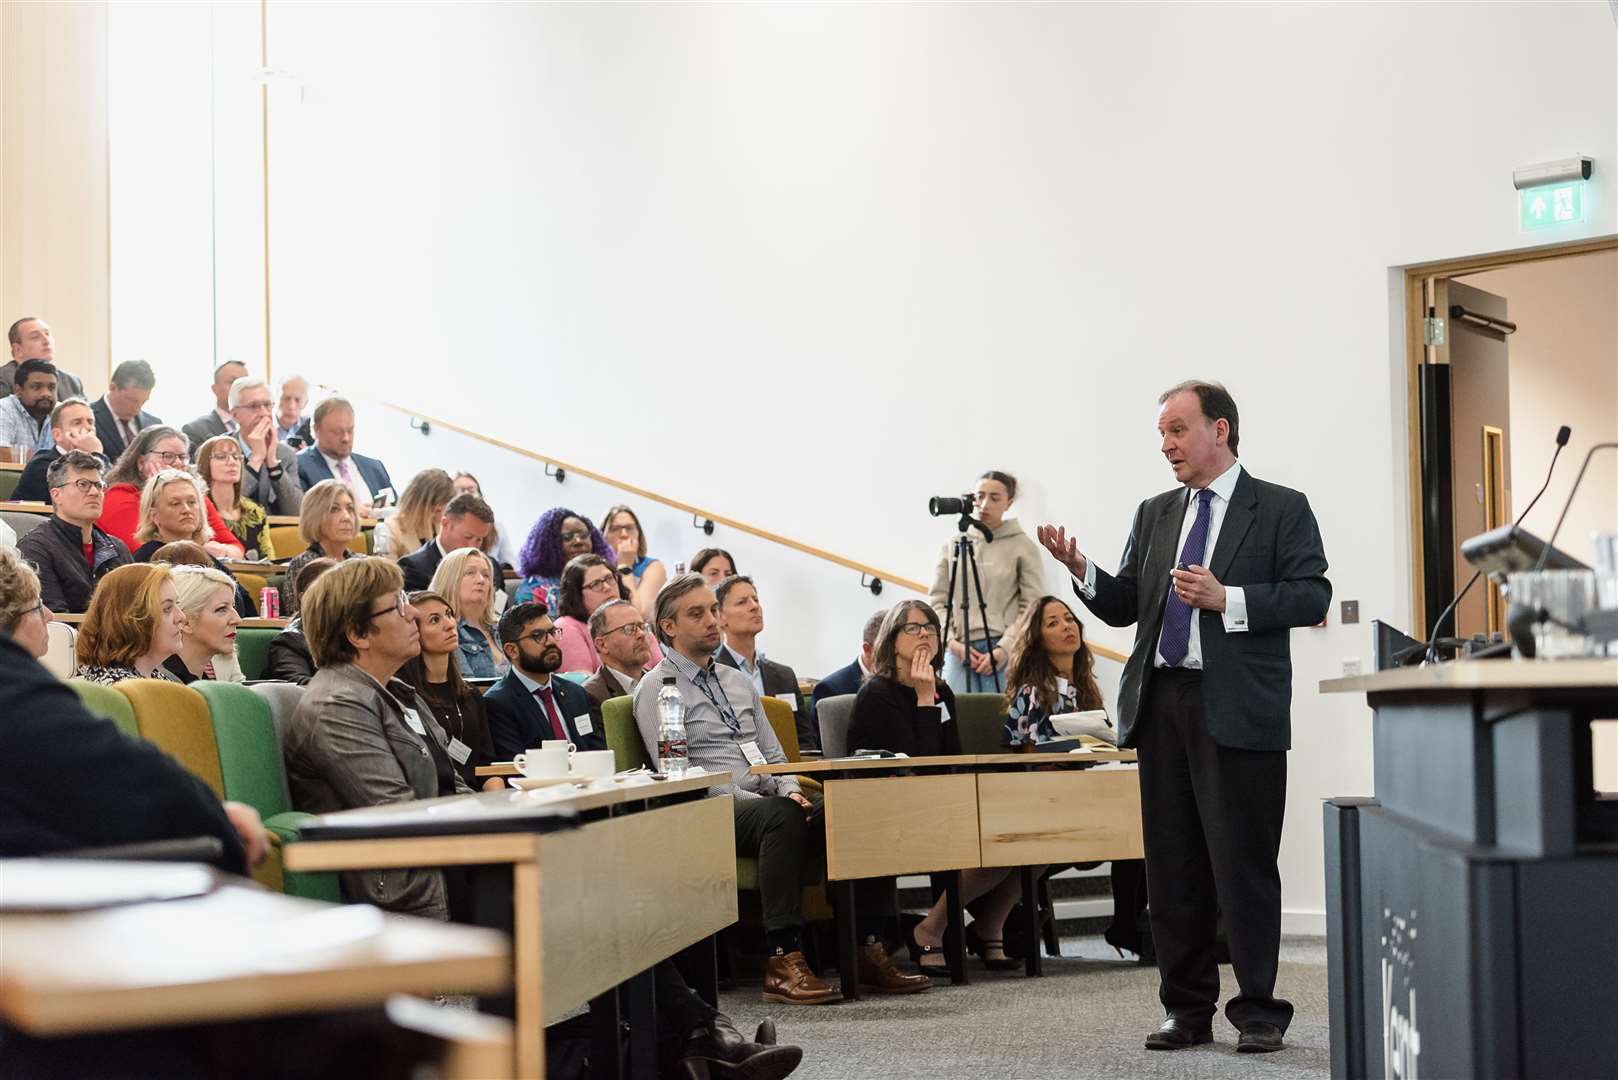 The Kent & Medway Business Summit returns to the University of Kent in January